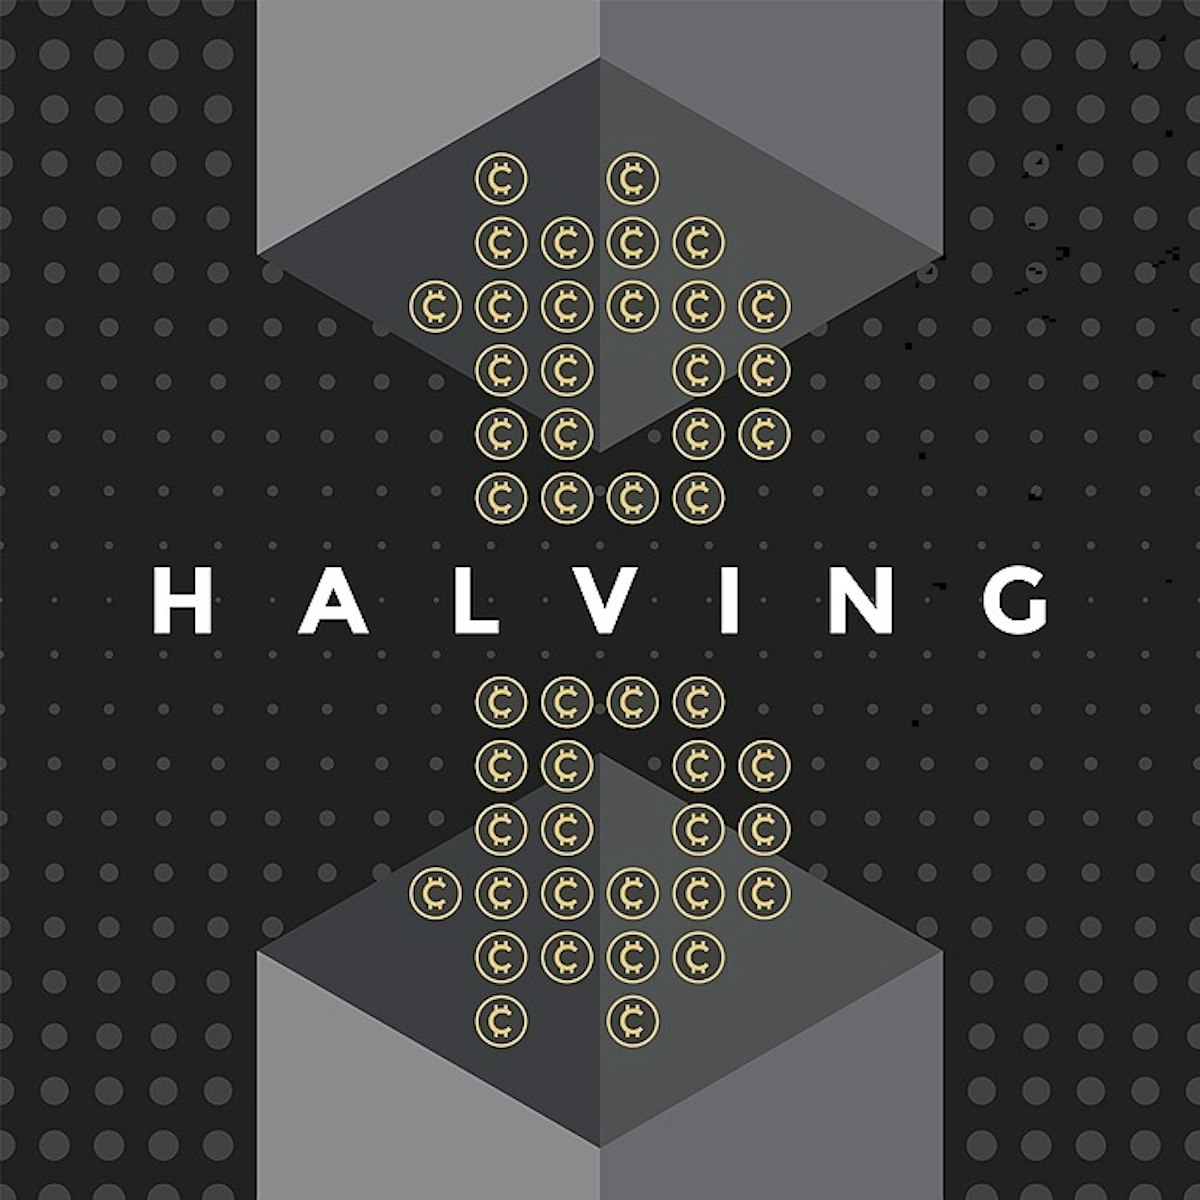 featured image - What Could Be Causing Google Searches for “Bitcoin Halving” to Surge?